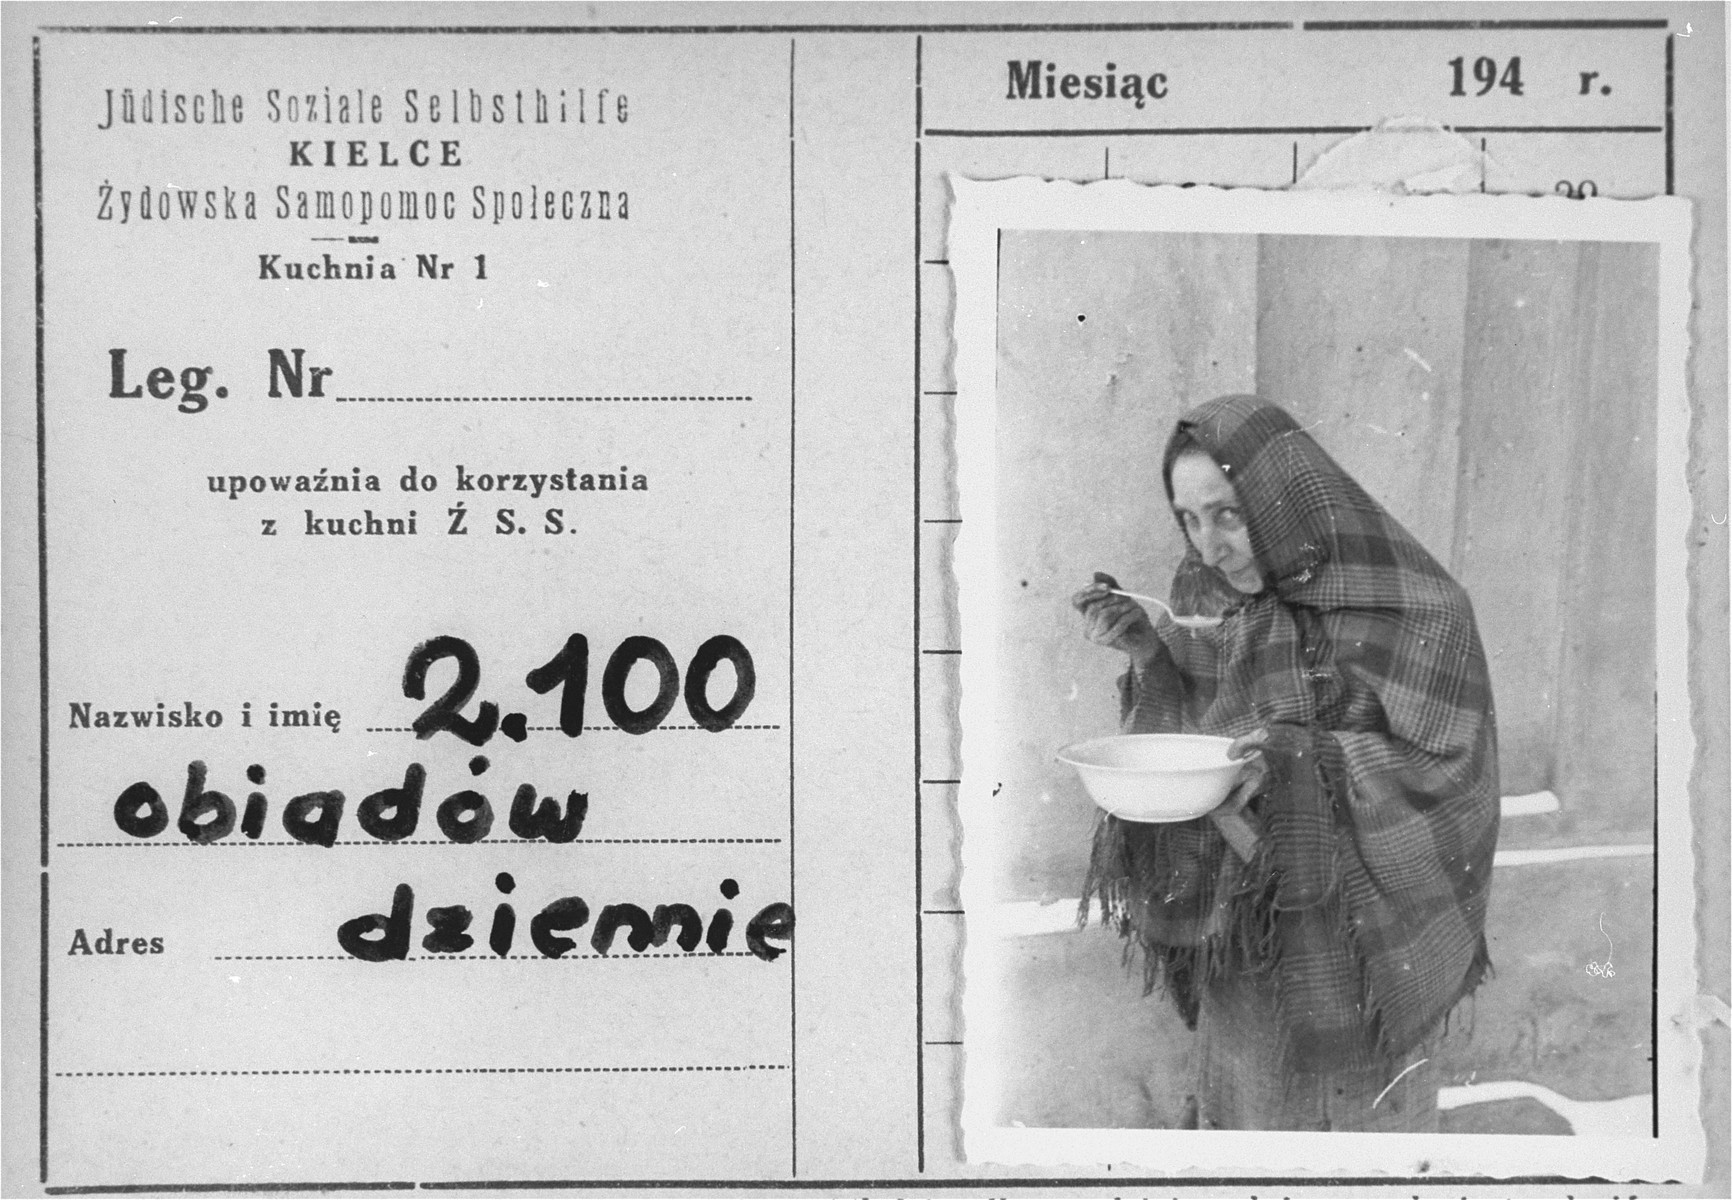 An identification card bearing a photo of a woman eating a bowl of soup in the Kielce ghetto.

An official ID card was required to receive food rations at the soup kitchen organized by the Jewish Social Self-help Committee of the Jewish Council. The inscription in Polish reads: 2,100 dinners served daily.

This photo was one the images included in an official album prepared by the Judenrat of the Kielce ghetto in 1942.